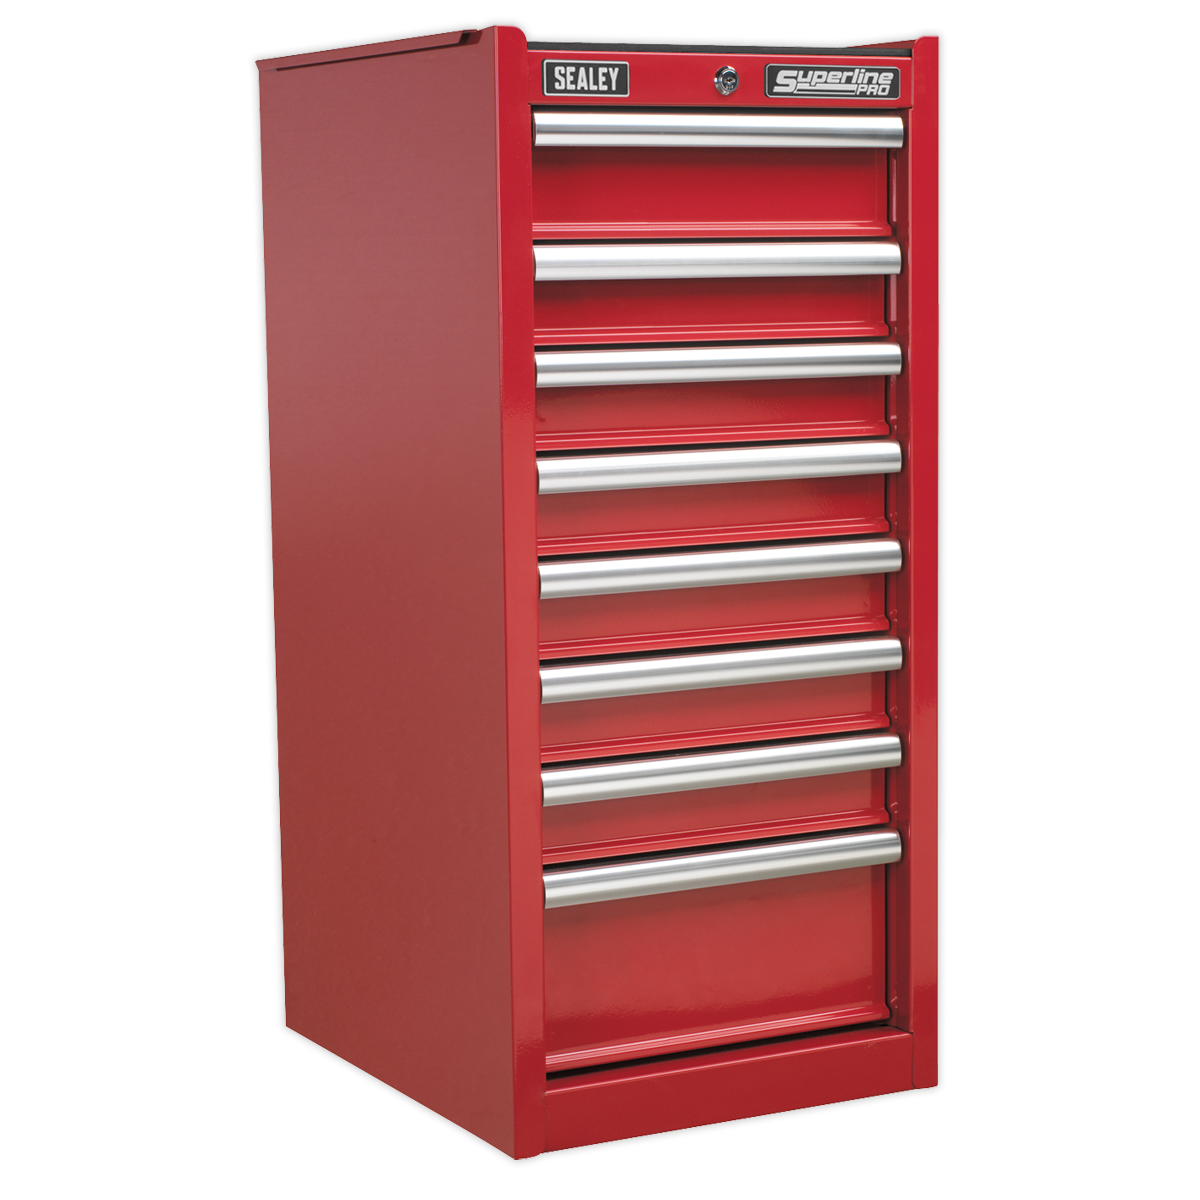 Sealey Hang-On Chest 8 Drawer with Ball-Bearing Slides - Red